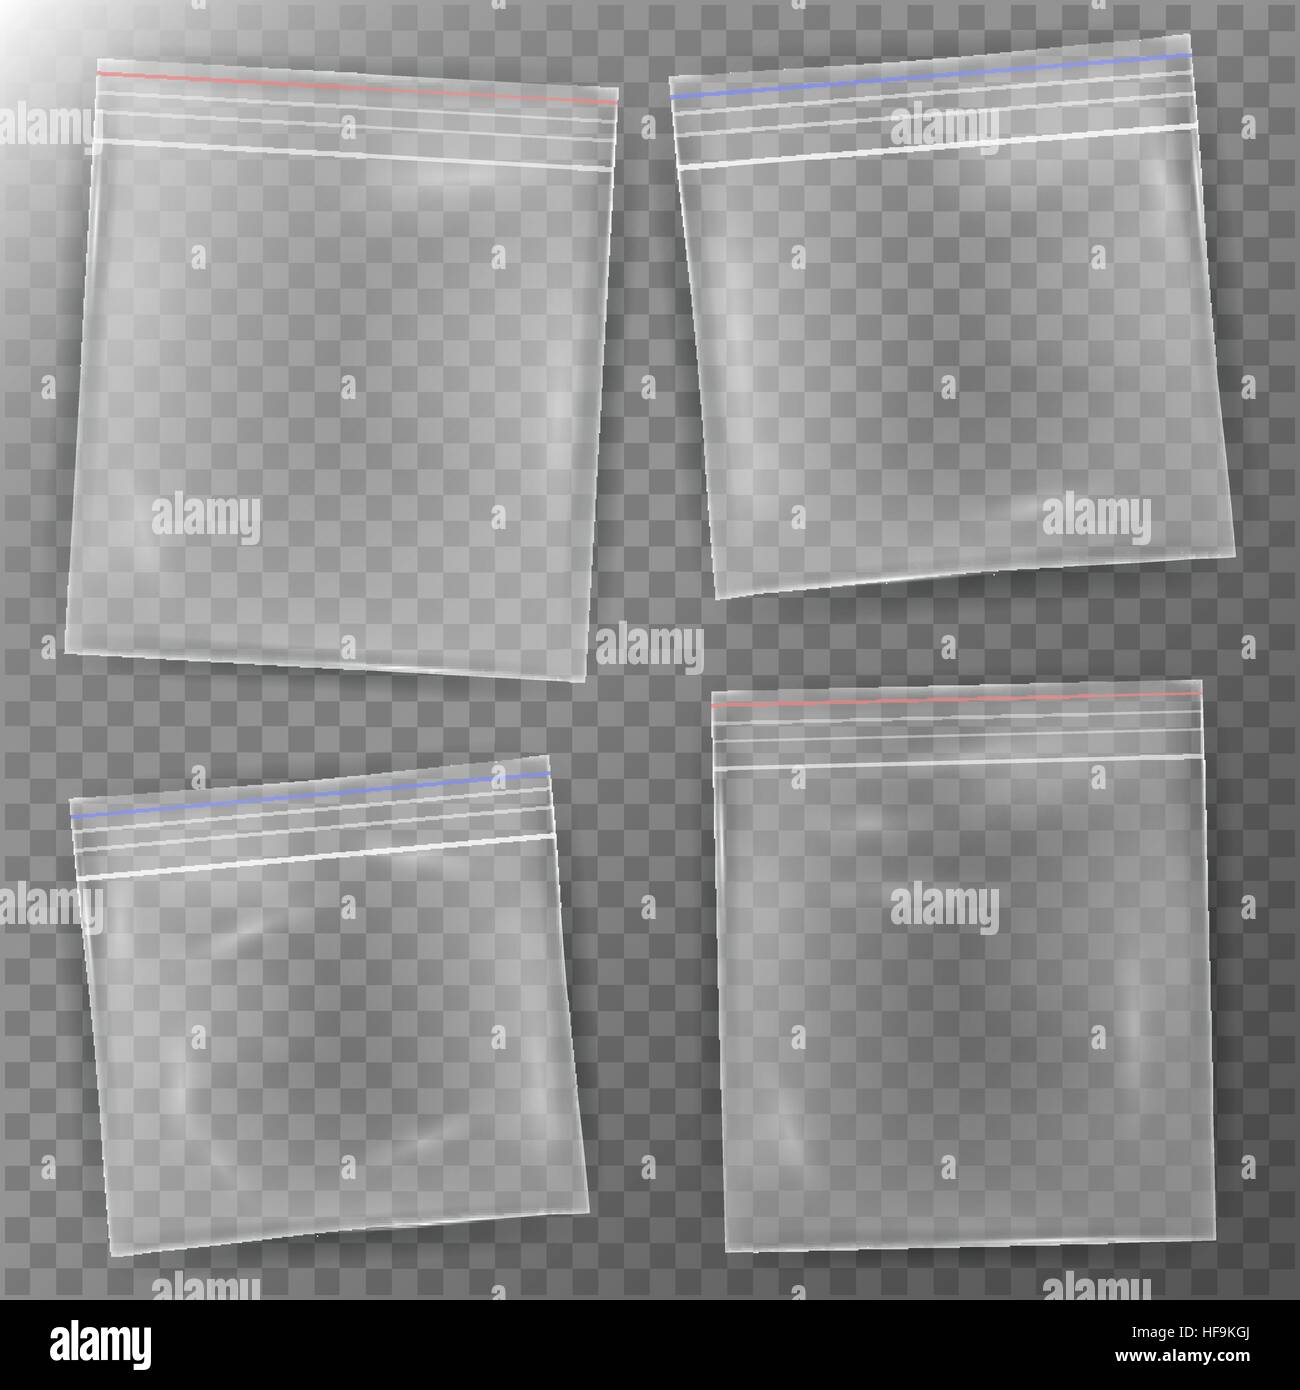 Plastic bag icon black outlines Royalty Free Vector Image